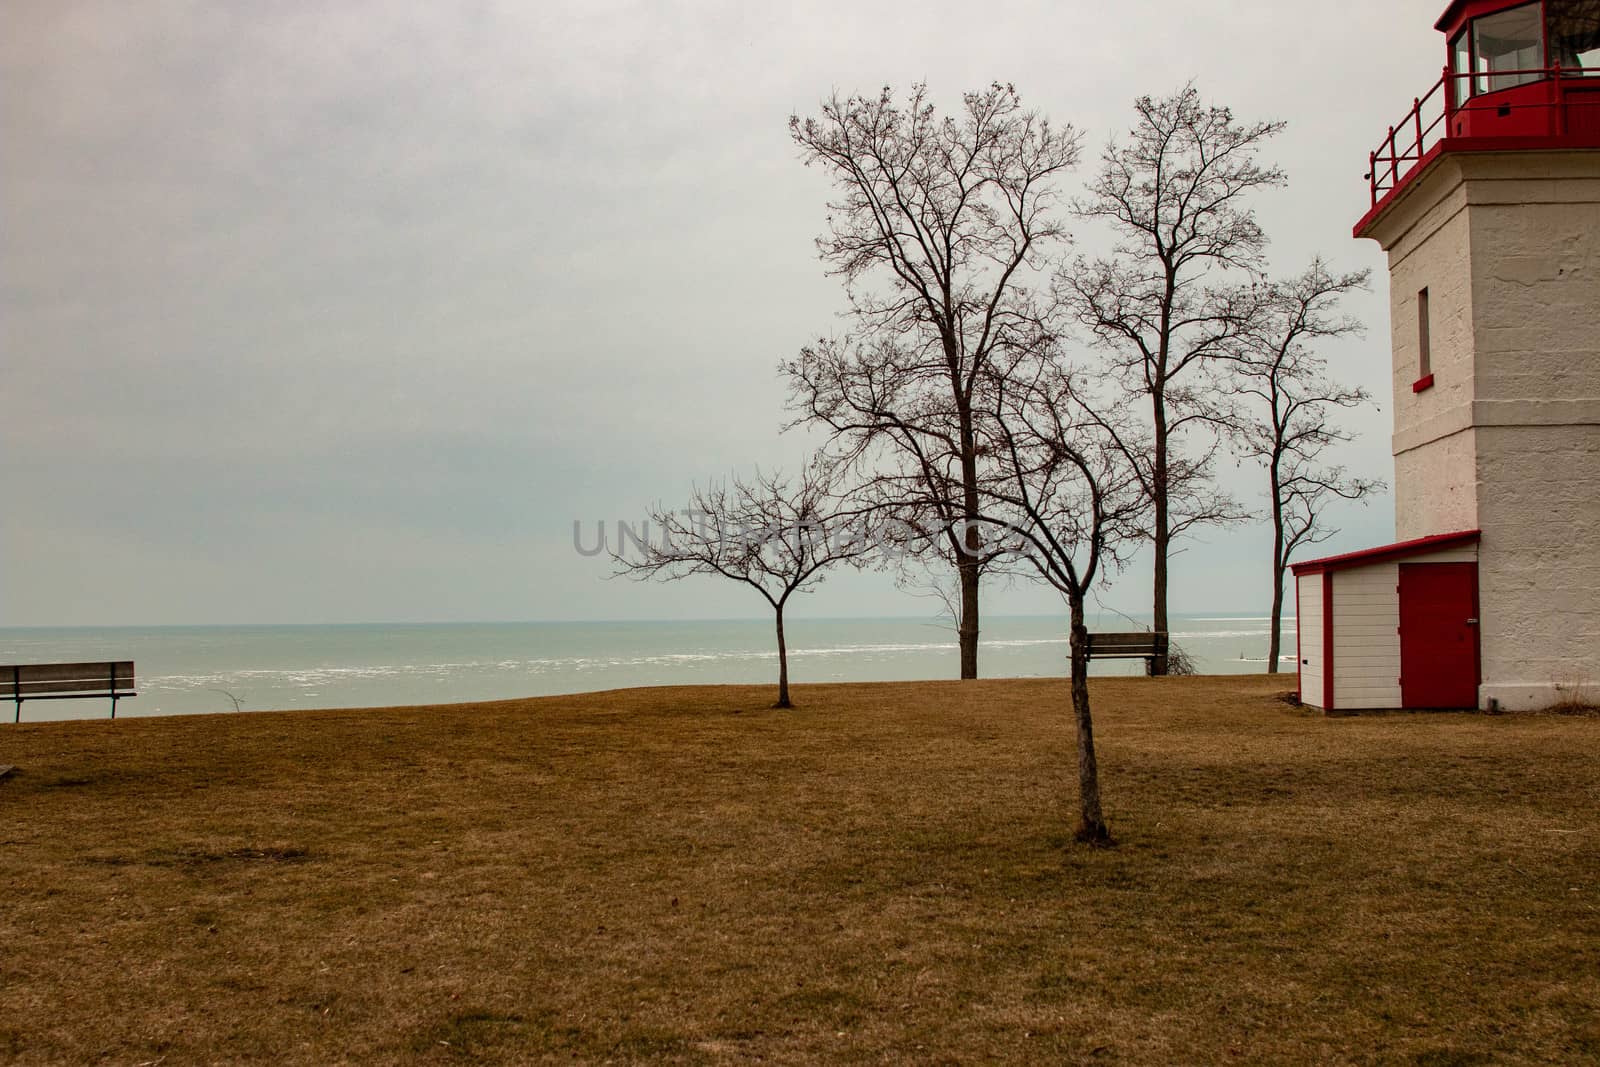 Goderich Ontario Canada lighthouse panoramic style photo. Goderich is popular for tourism. Taken in 2020 by mynewturtle1